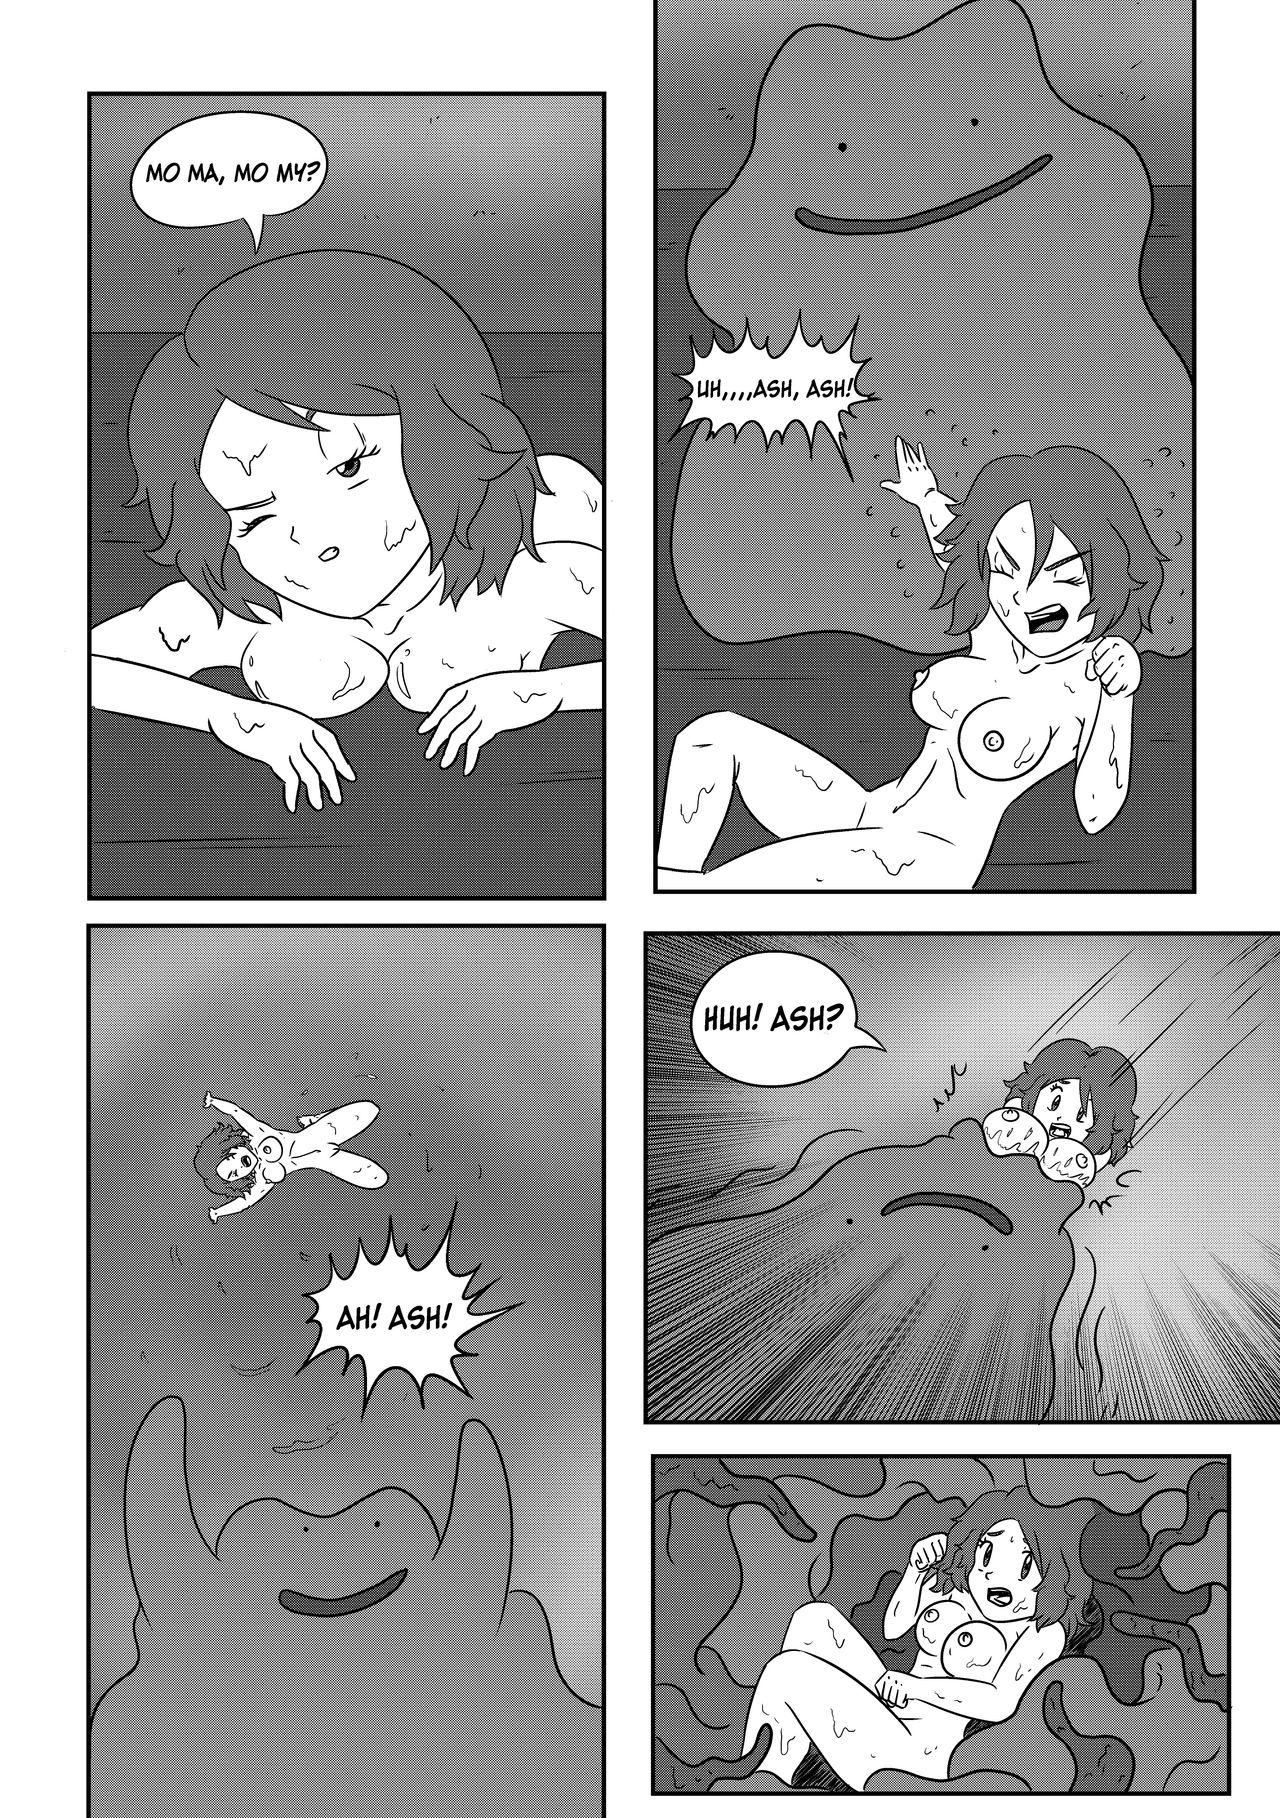 Asians The Probing of a Pokegirl, Serena - Pokemon Sharing - Page 9